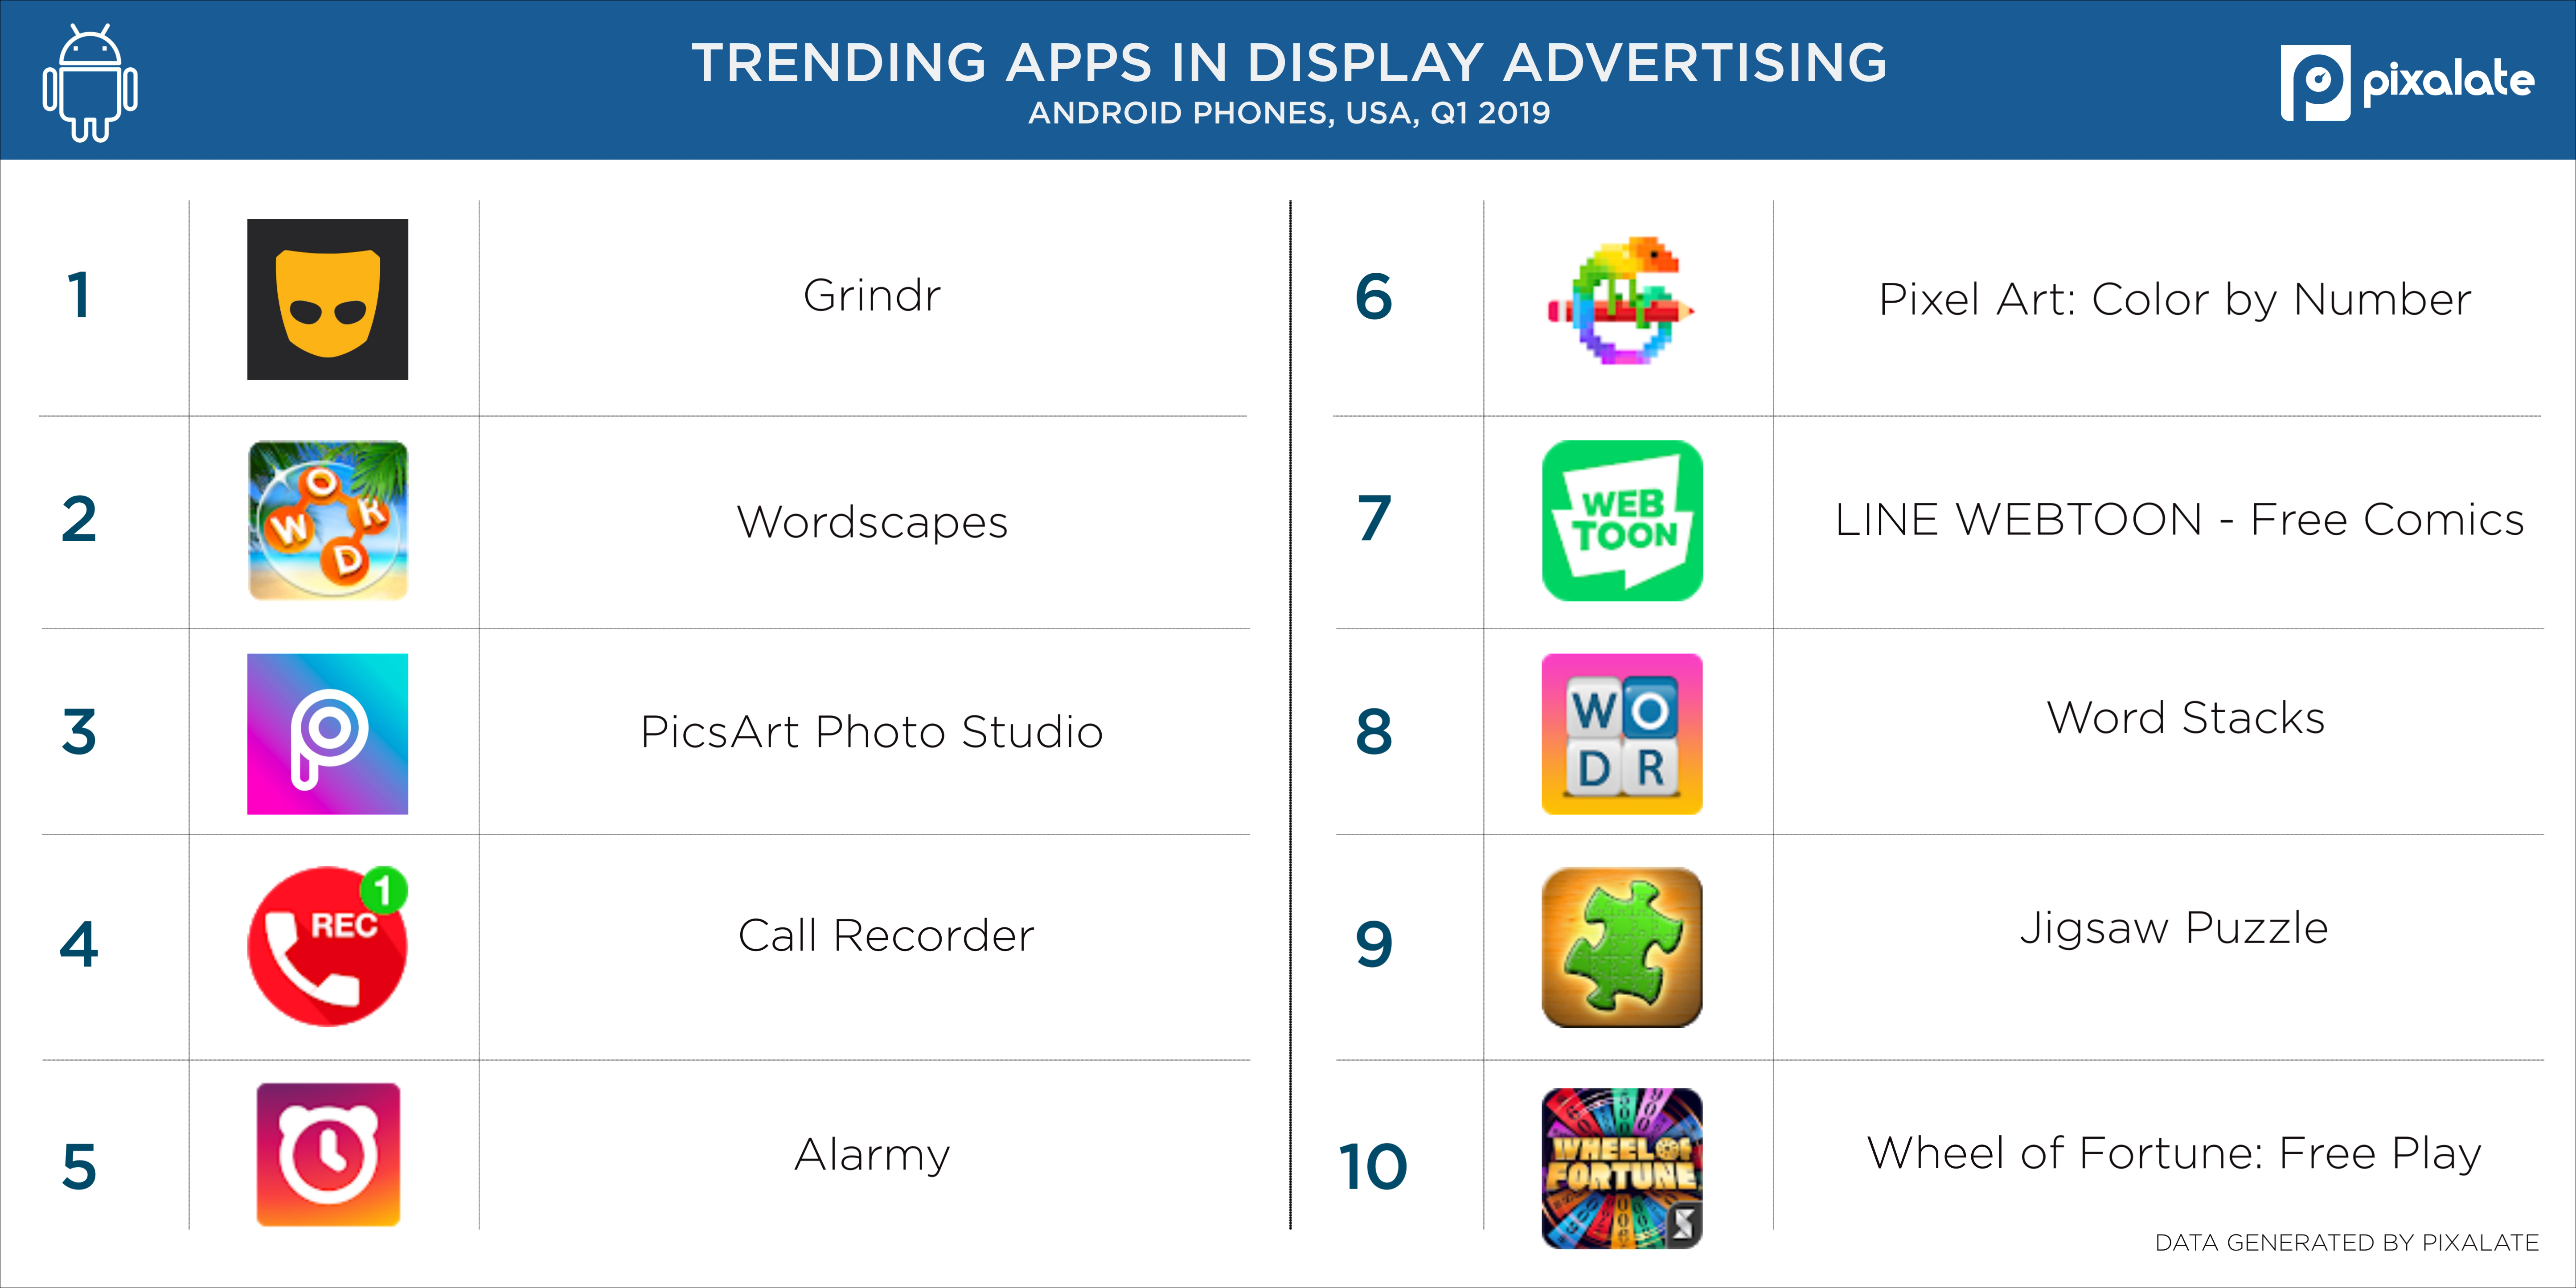 Games account for 90 of the top 10 trending Android phone apps for